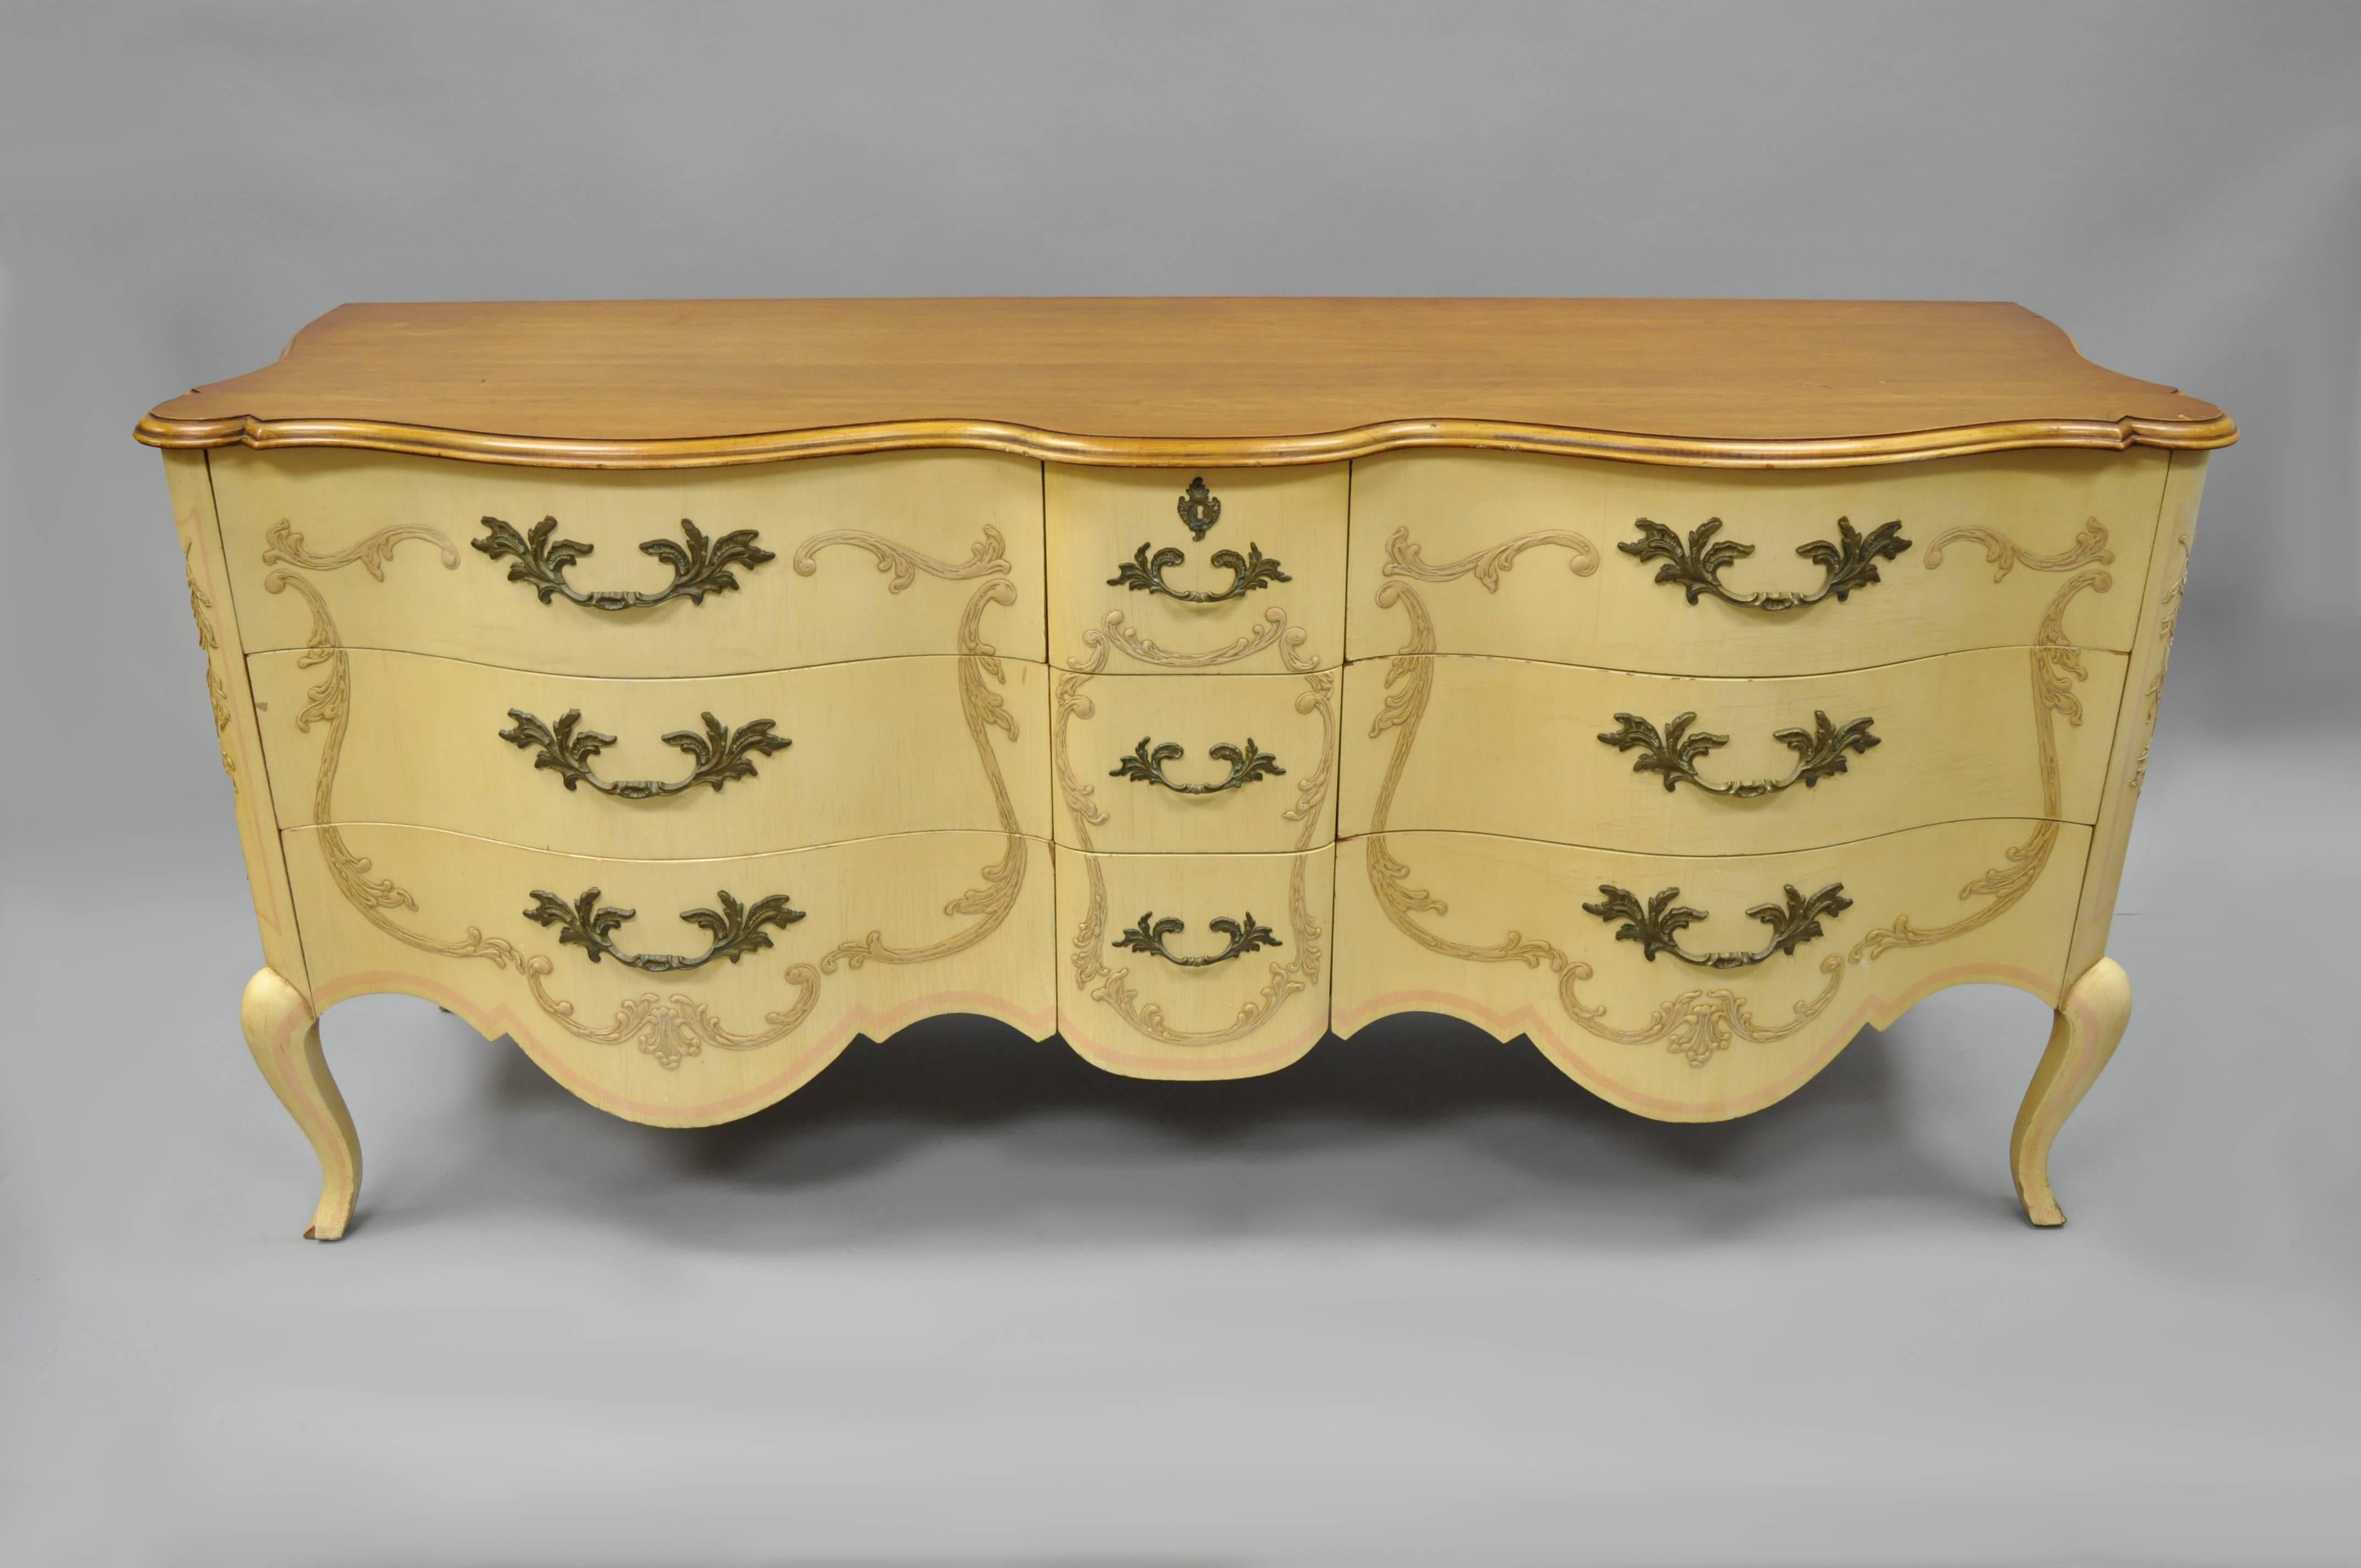 Vintage French Provincial Louis XV style cherry long dresser by John Widdicomb. Item features beautiful wood grain, shapely serpentine form, nicely carved details, quality American craftsmanship, nine dovetailed drawers, cabriole legs, and paint